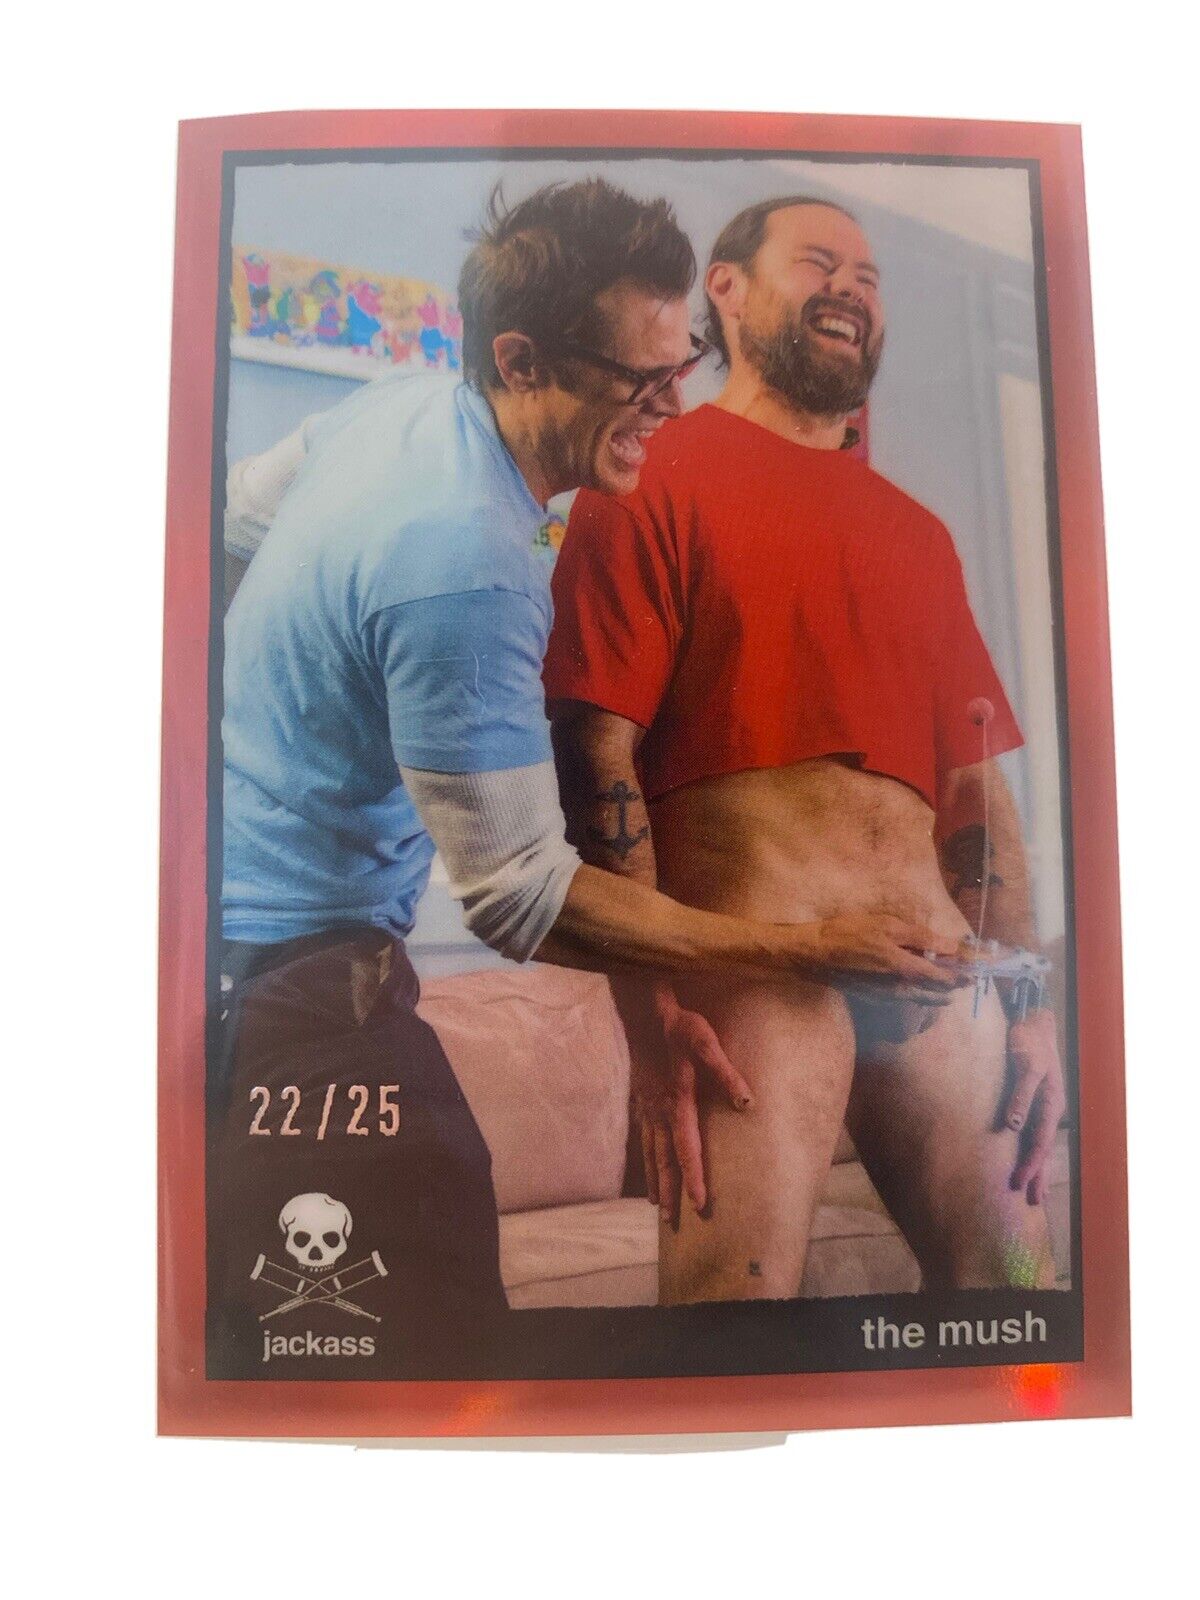 Zerocool Jackass The Mush /25 Johnny Knoxville Chris Pontius Red Holo